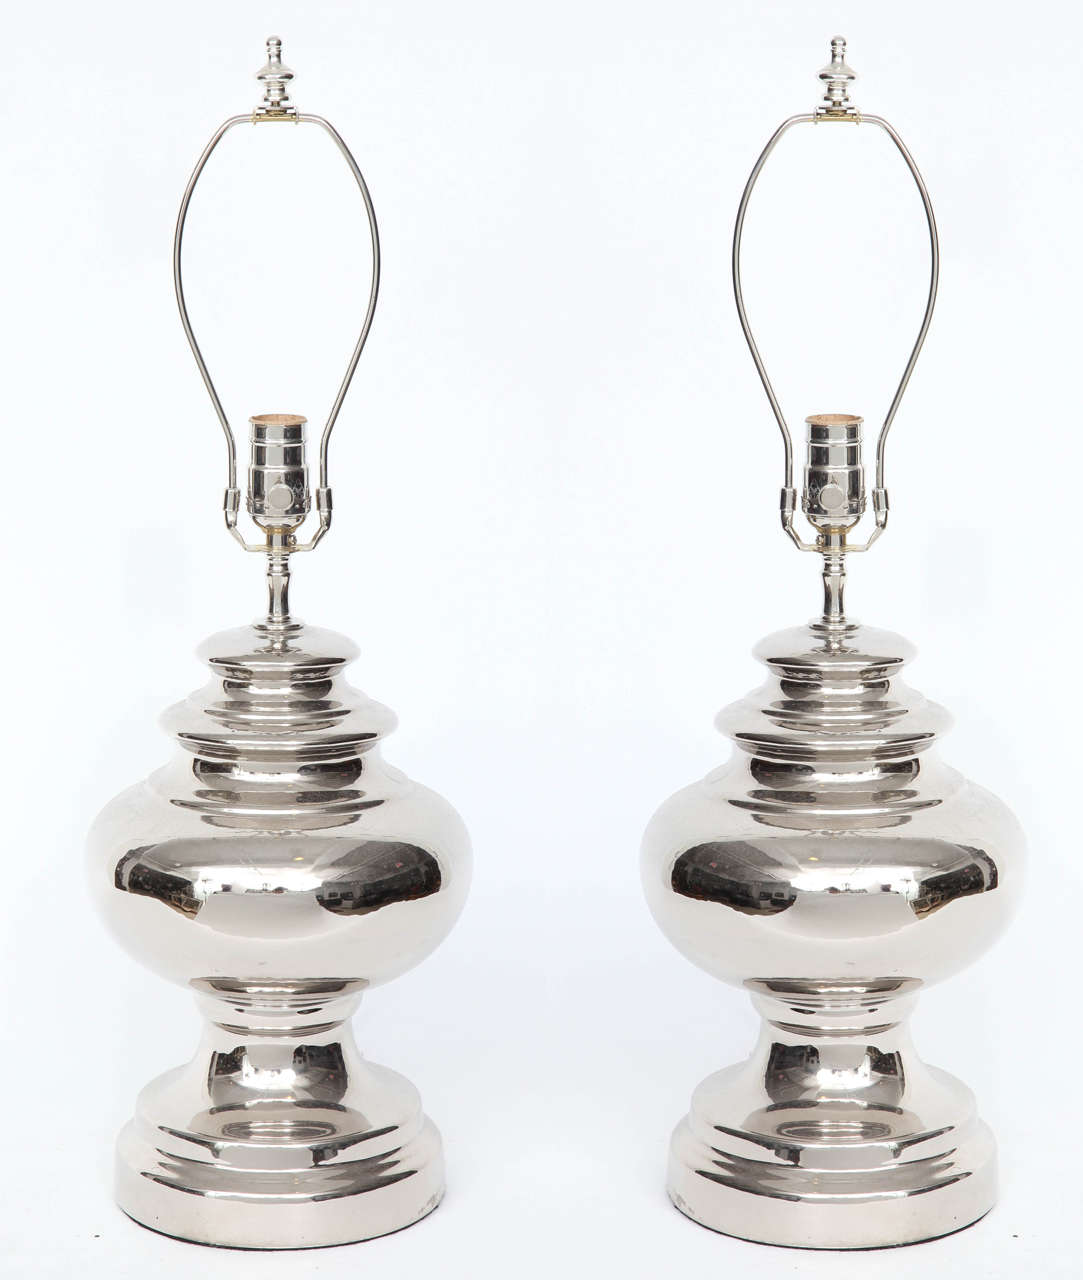 Pair of Scandinavian Modern platinum glazed ceramic lamps by Bitossi for Bergboms. Rewired for use in the USA, 100W max bulb.